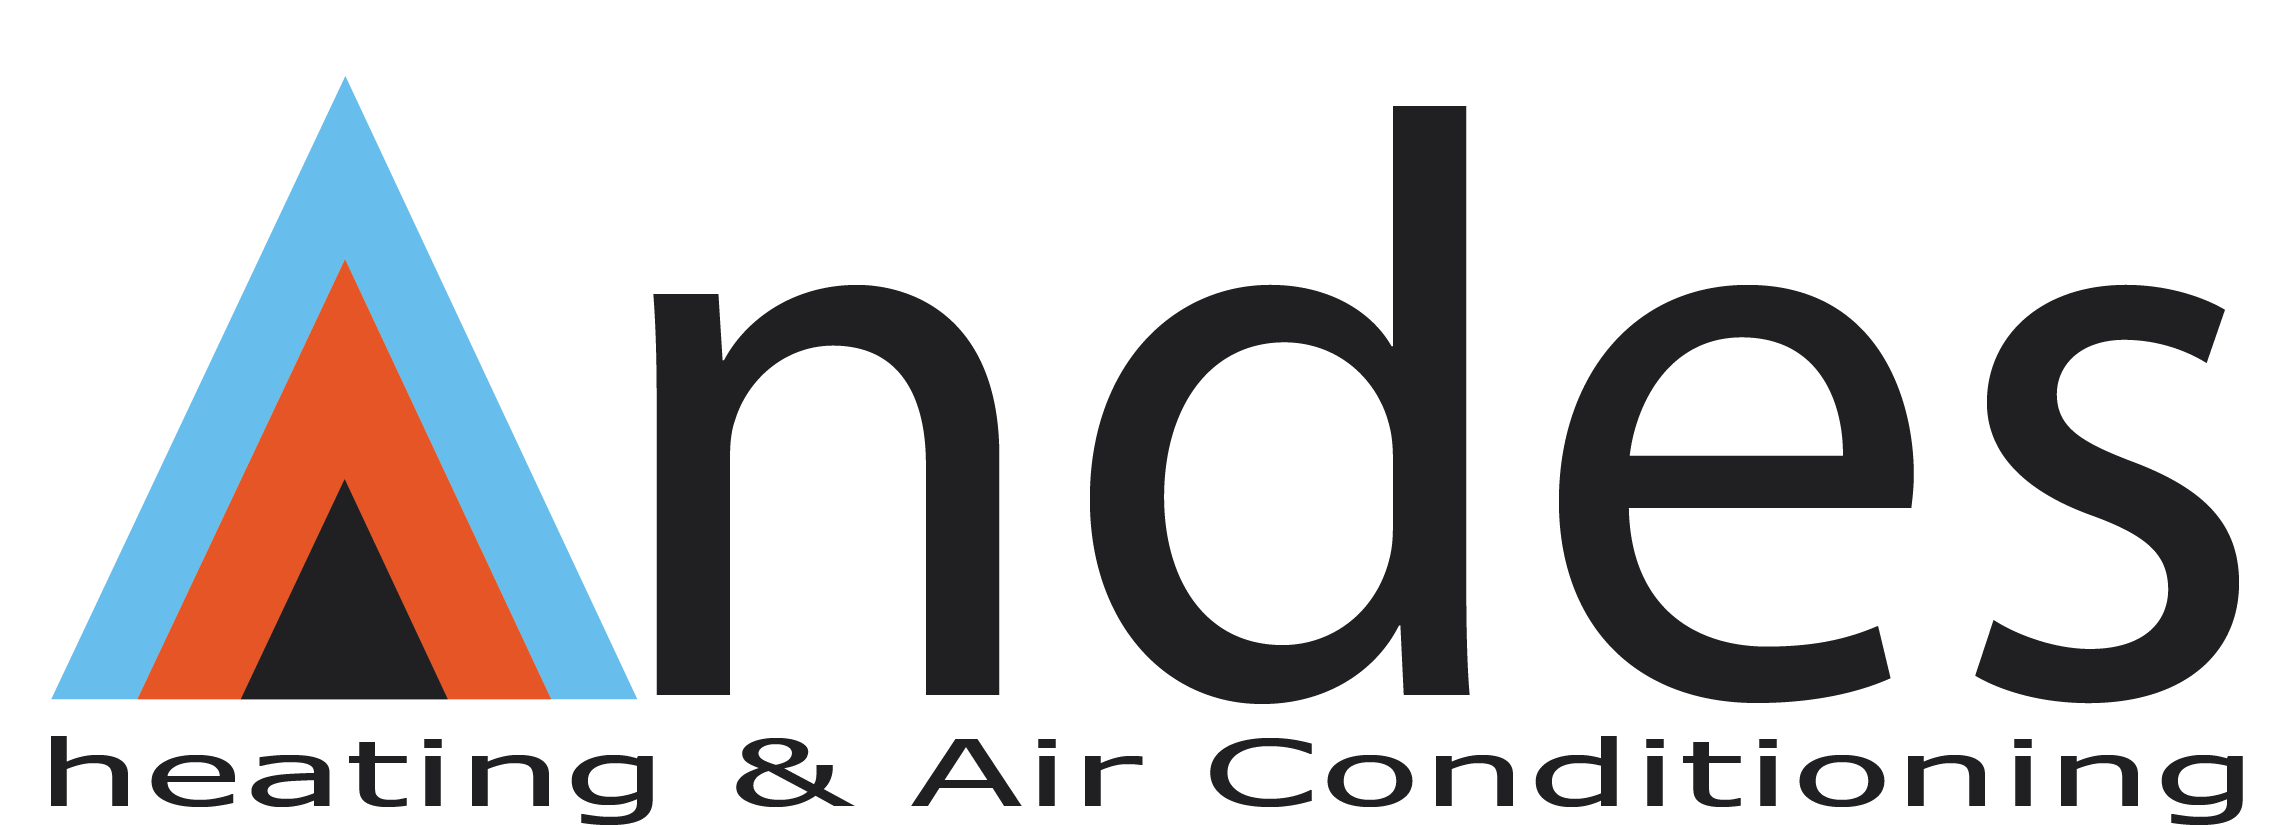 Andes Heating & Air Conditioning